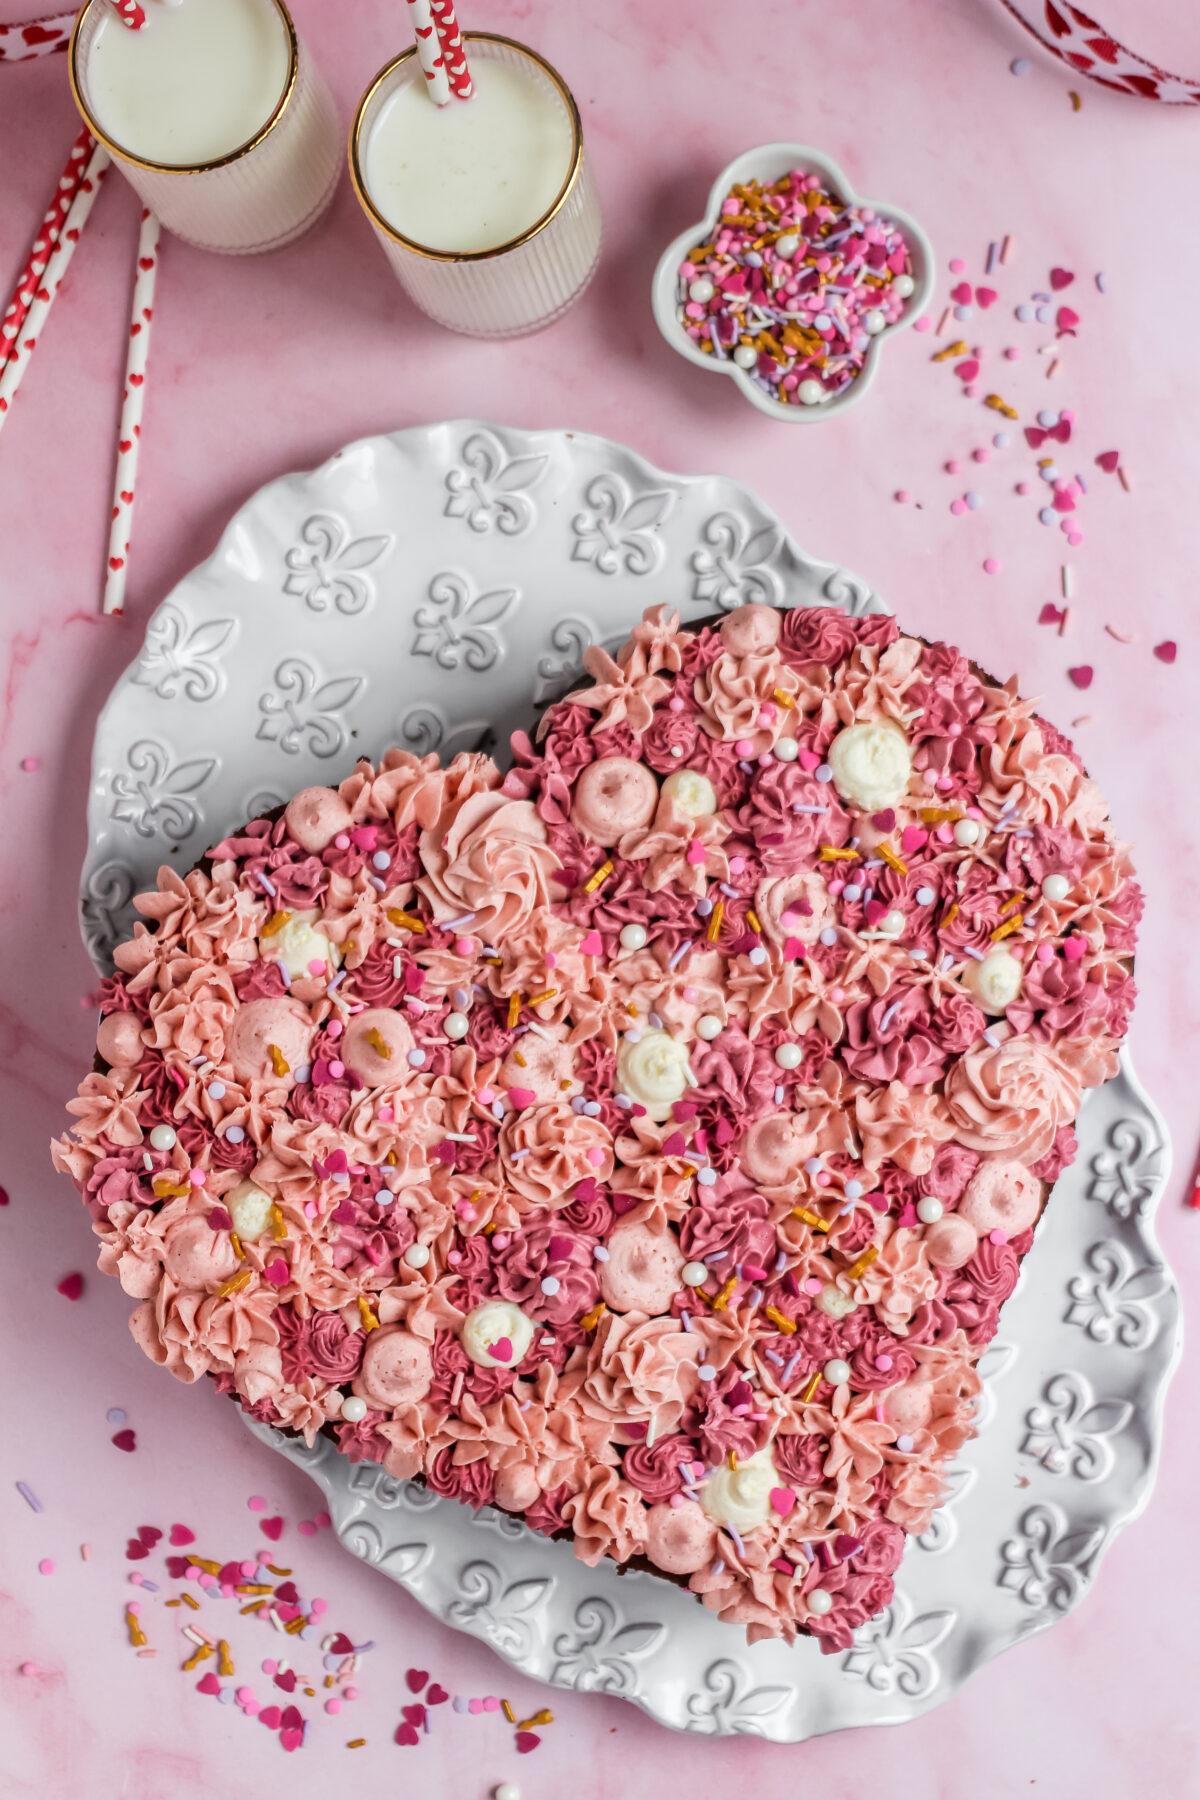 This Valentine's Day, impress your loved ones with this delicious and easy-to-follow Heart-Shaped Chocolate Strawberry Cake recipe!